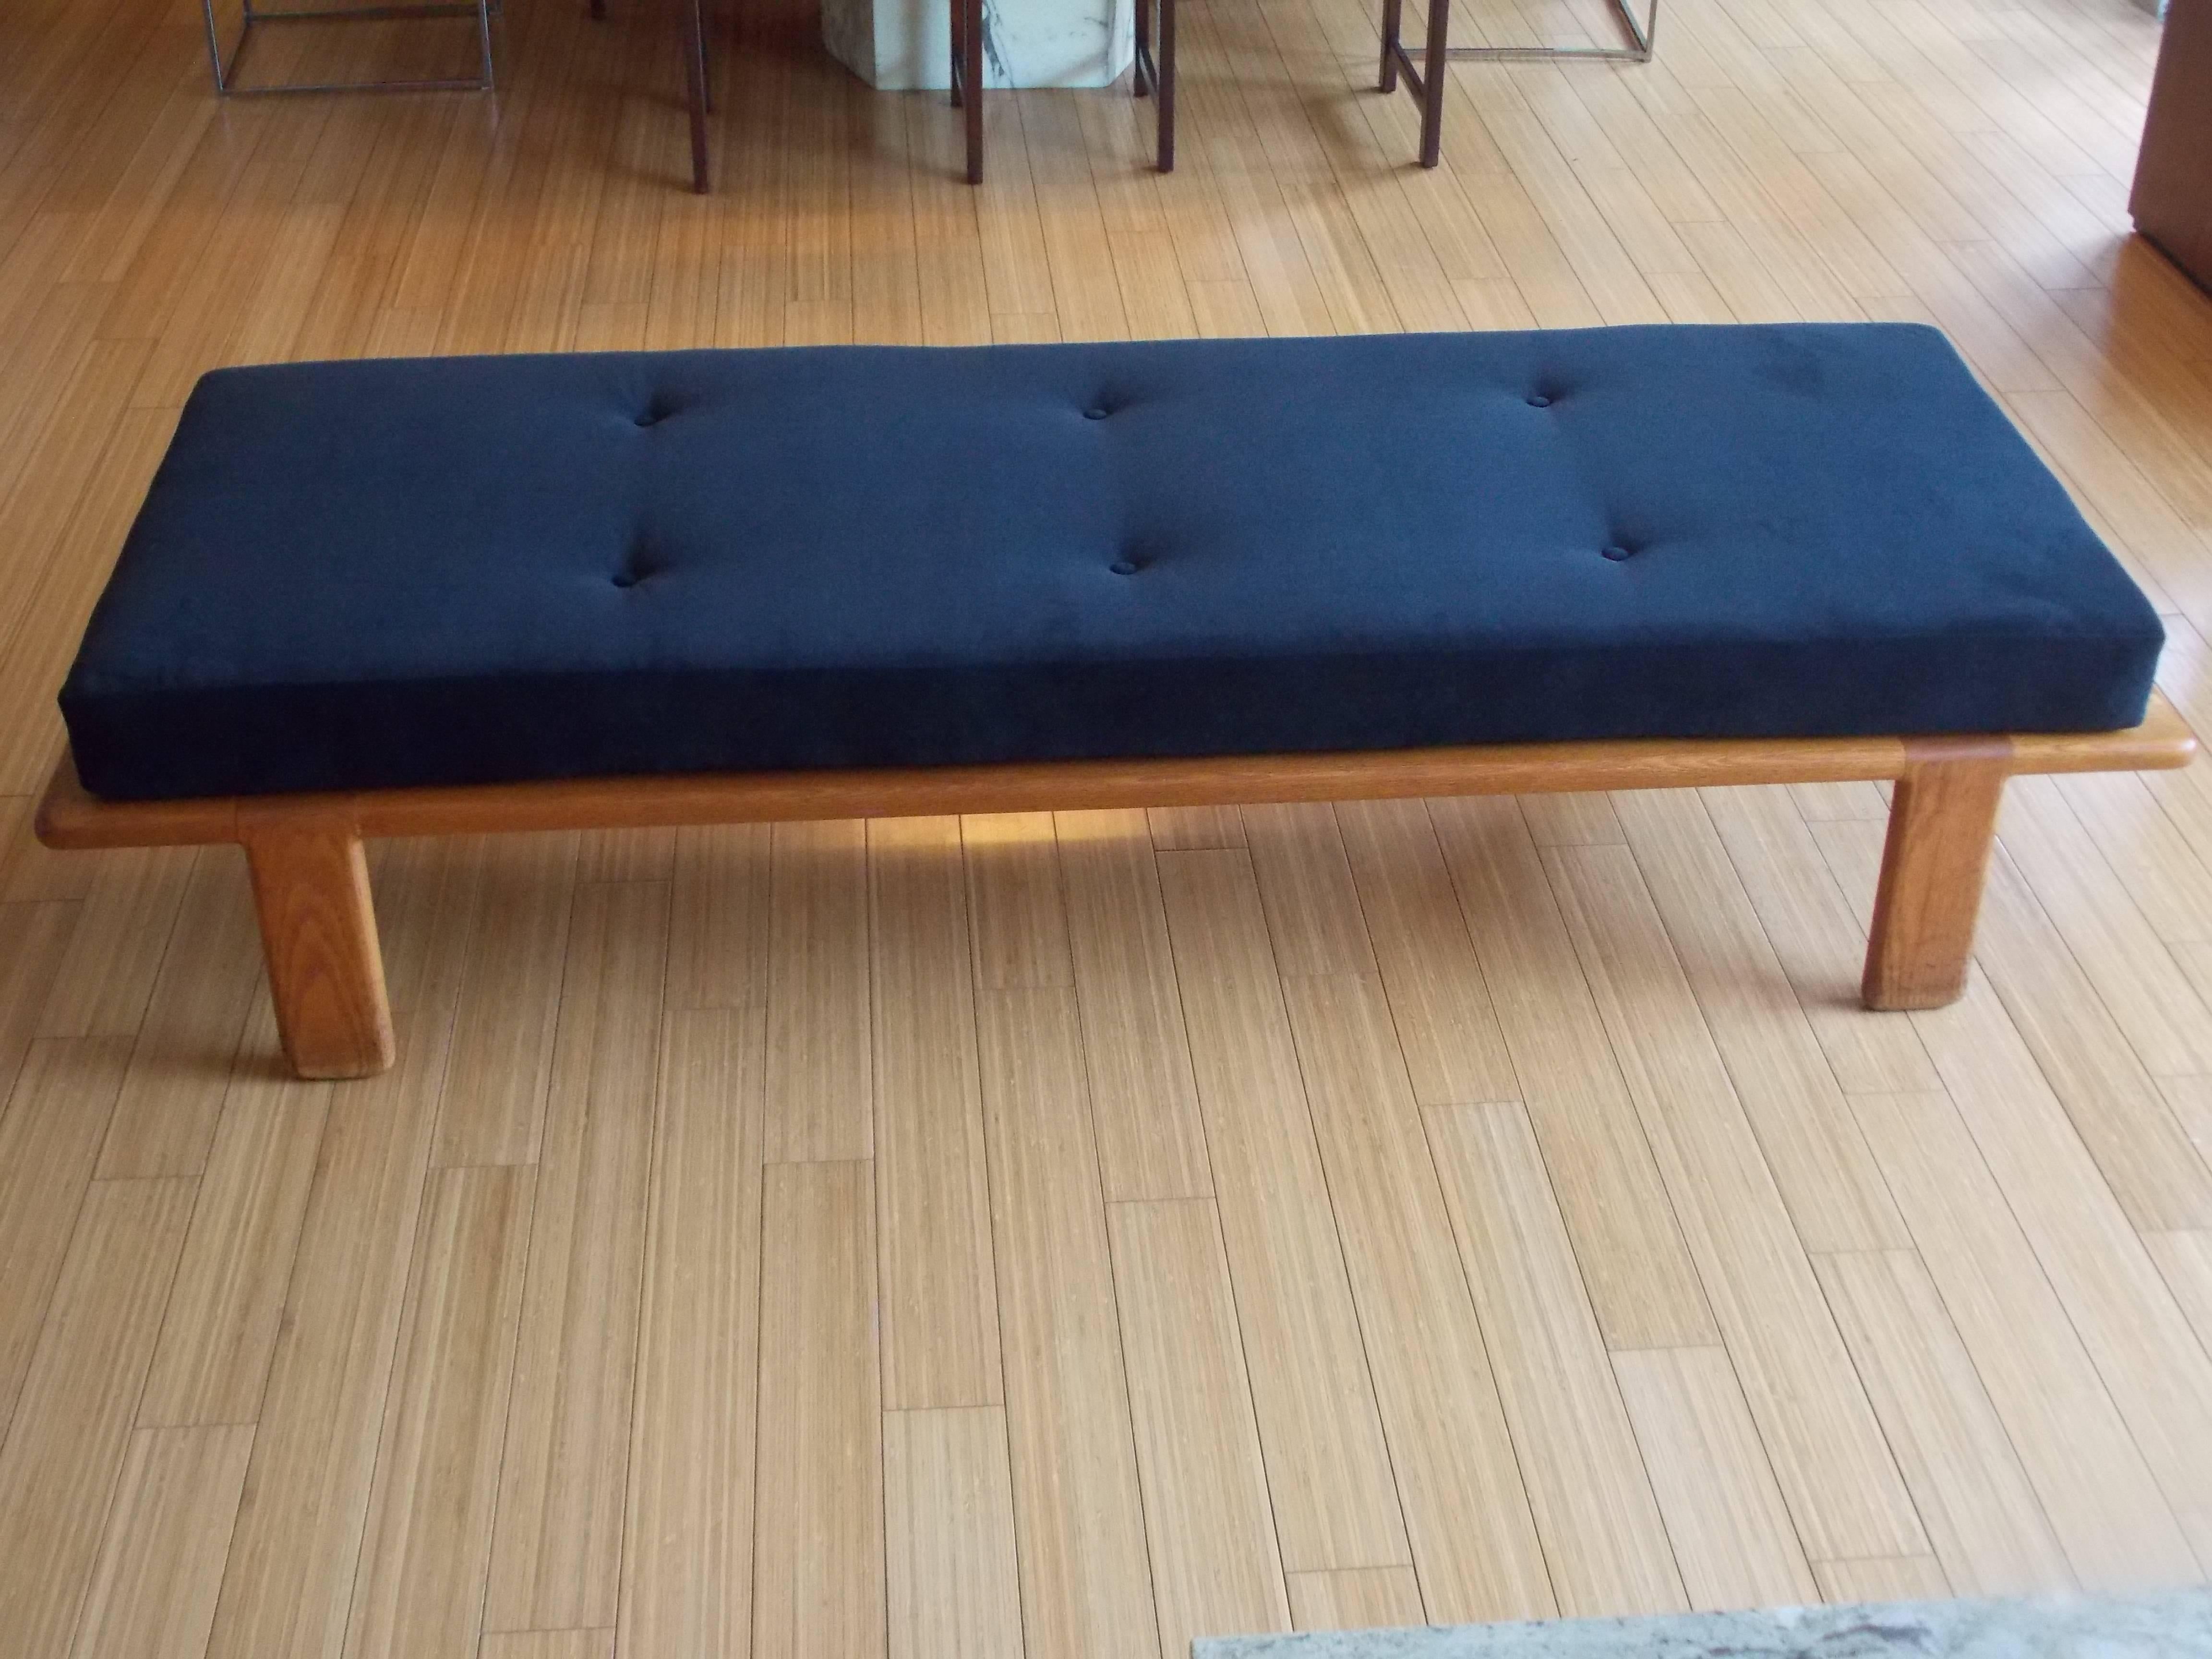 Gerald McCabe (1928-2010).
A nice and humble California modernist design.
Made of oak wood construction with nice joinery detail with new upholstered cushion.
The color of the fabric is almost black more like a midnight blue.
The wood has not